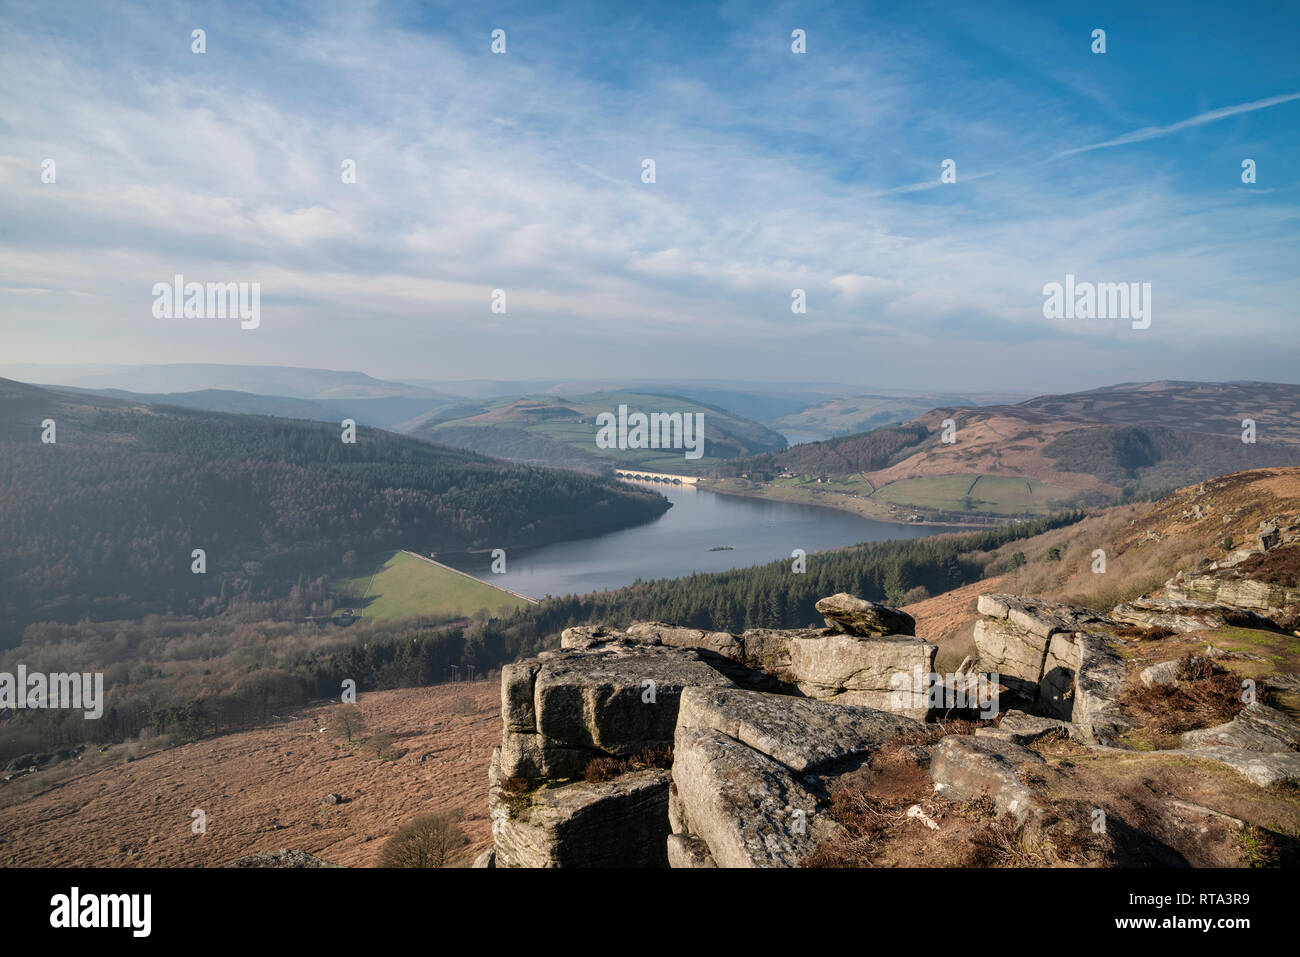 Beautiful landscape image of the Peak District in England viewed from Bamford Edge with Ladybower Reservoir under a beautiful blue Winter sky Stock Photo